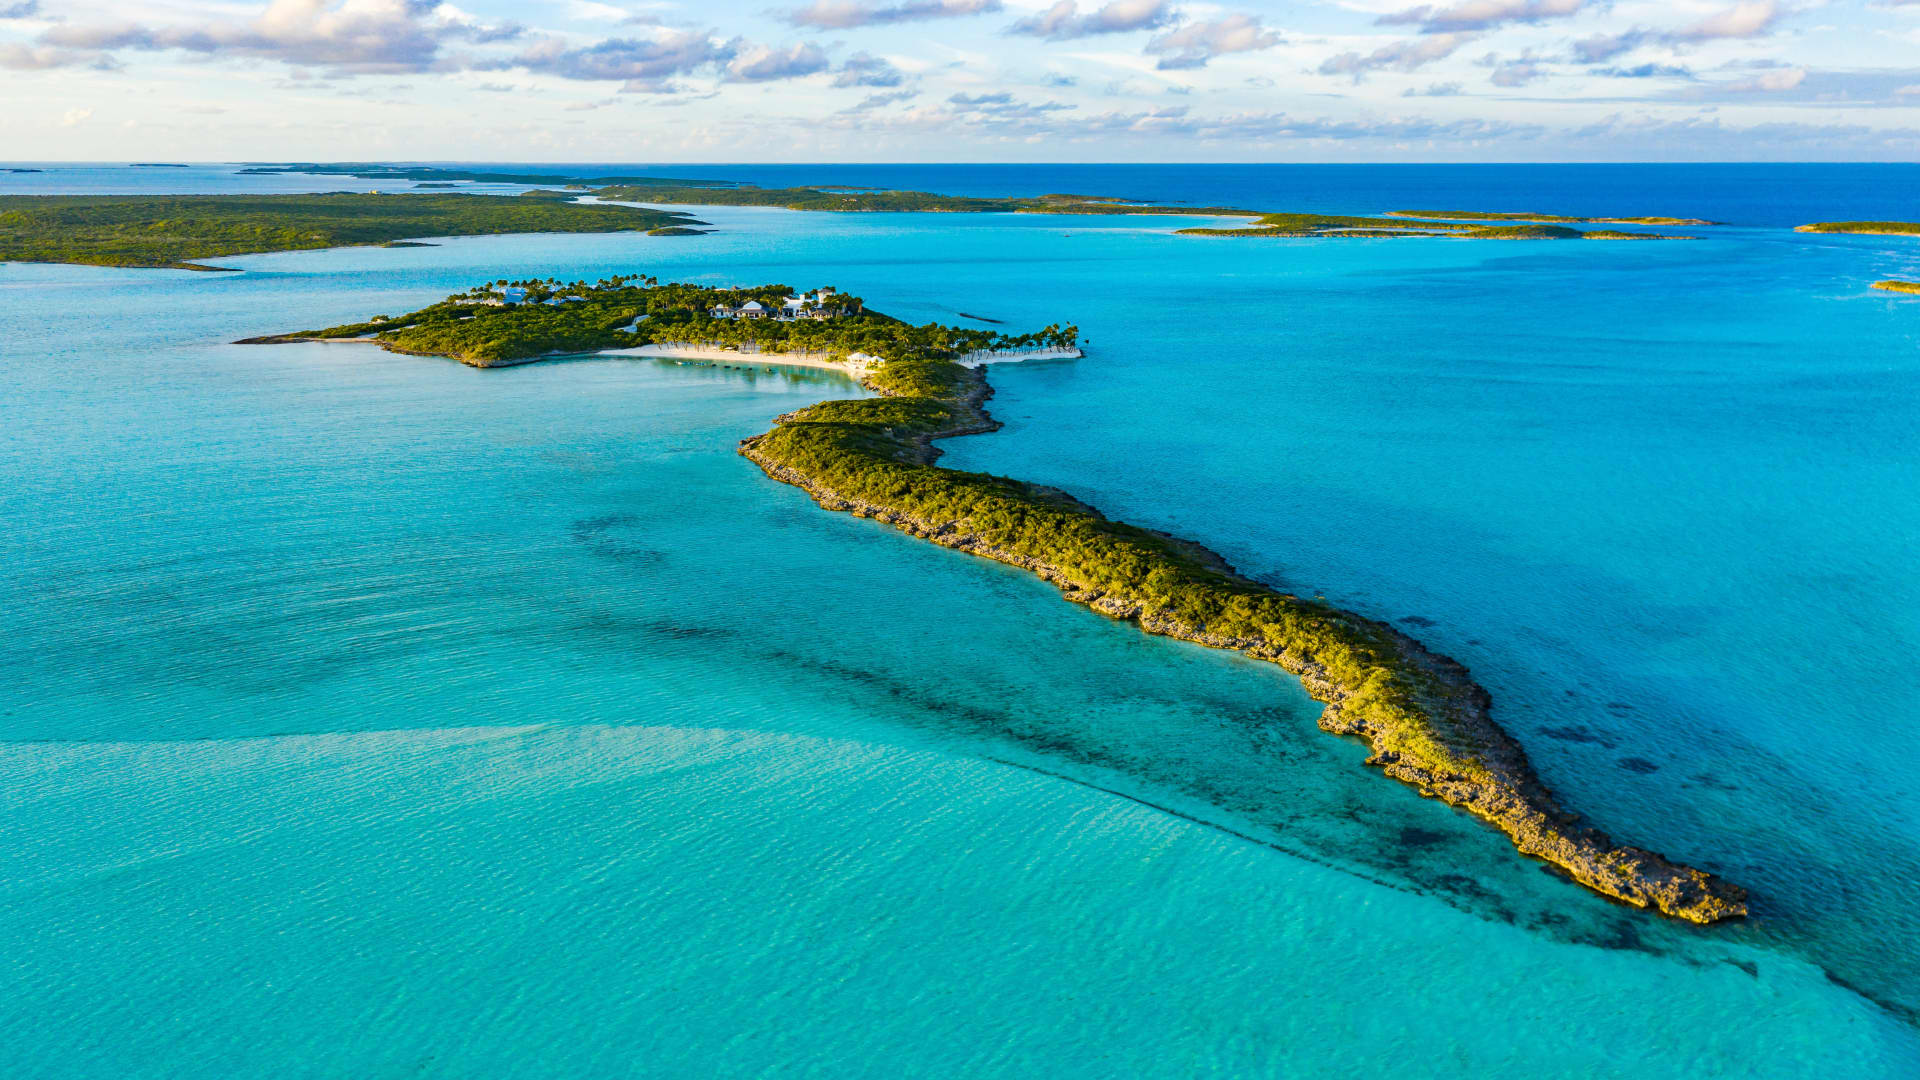 The area is also known as Goat Cay and is located in Exumas, Bahamas.